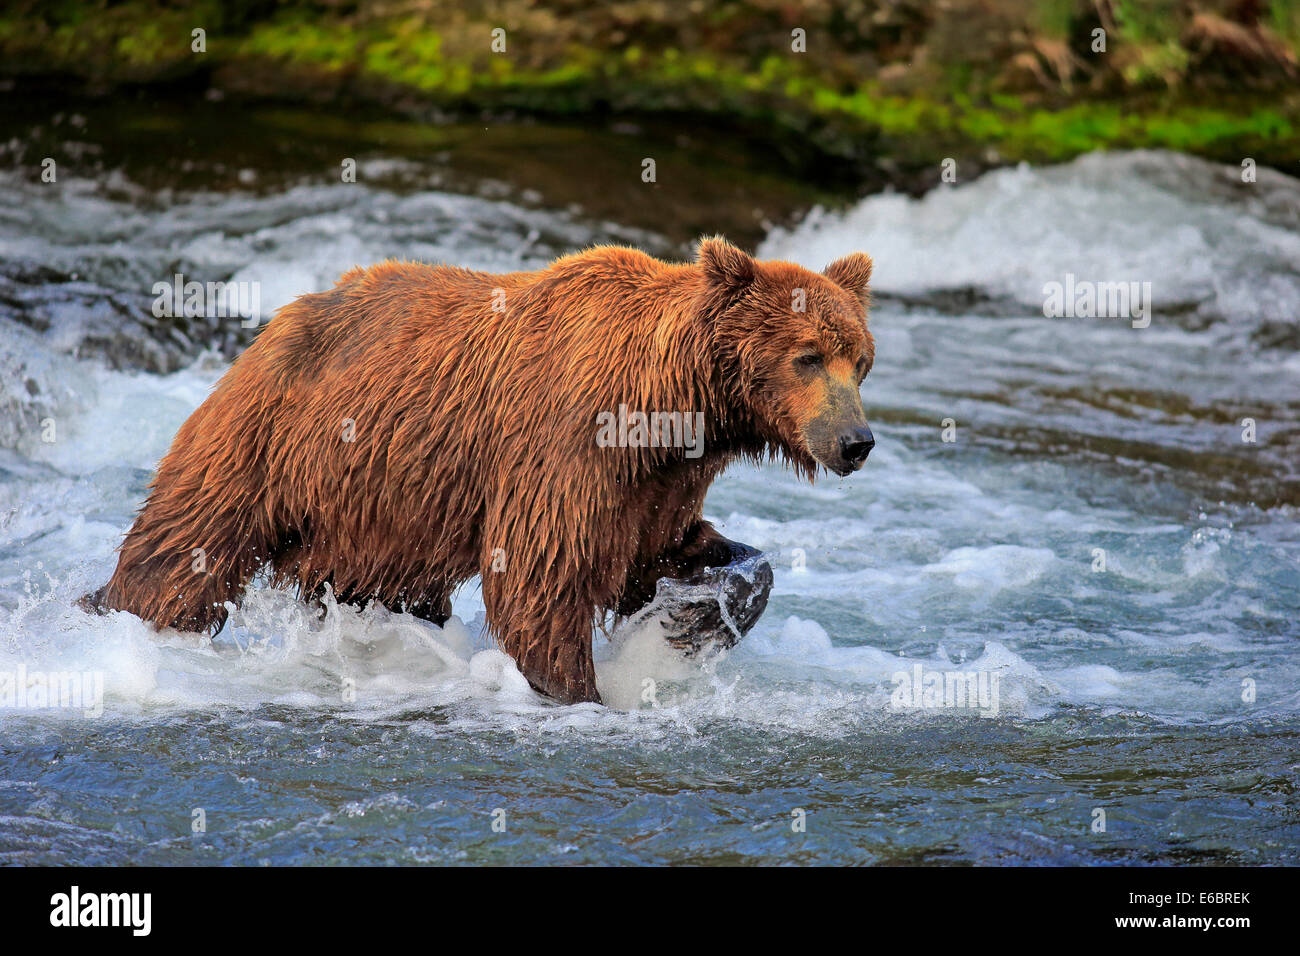 Grizzly Bear (Ursus arctos horribilis) adult, foraging in the water, Brooks River, Katmai National Park and Preserve, Alaska Stock Photo